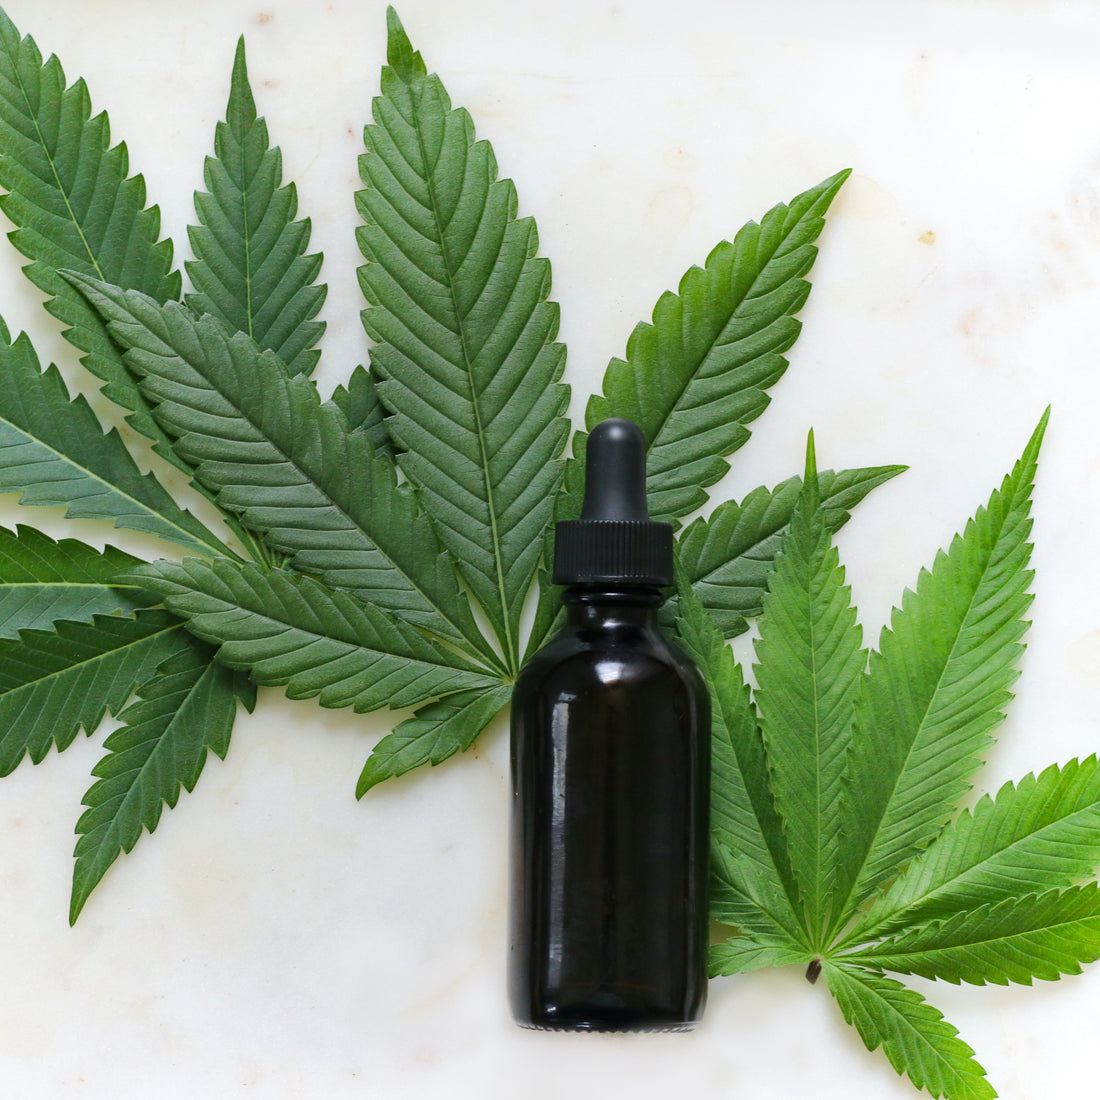 What type of CBD is most effective?